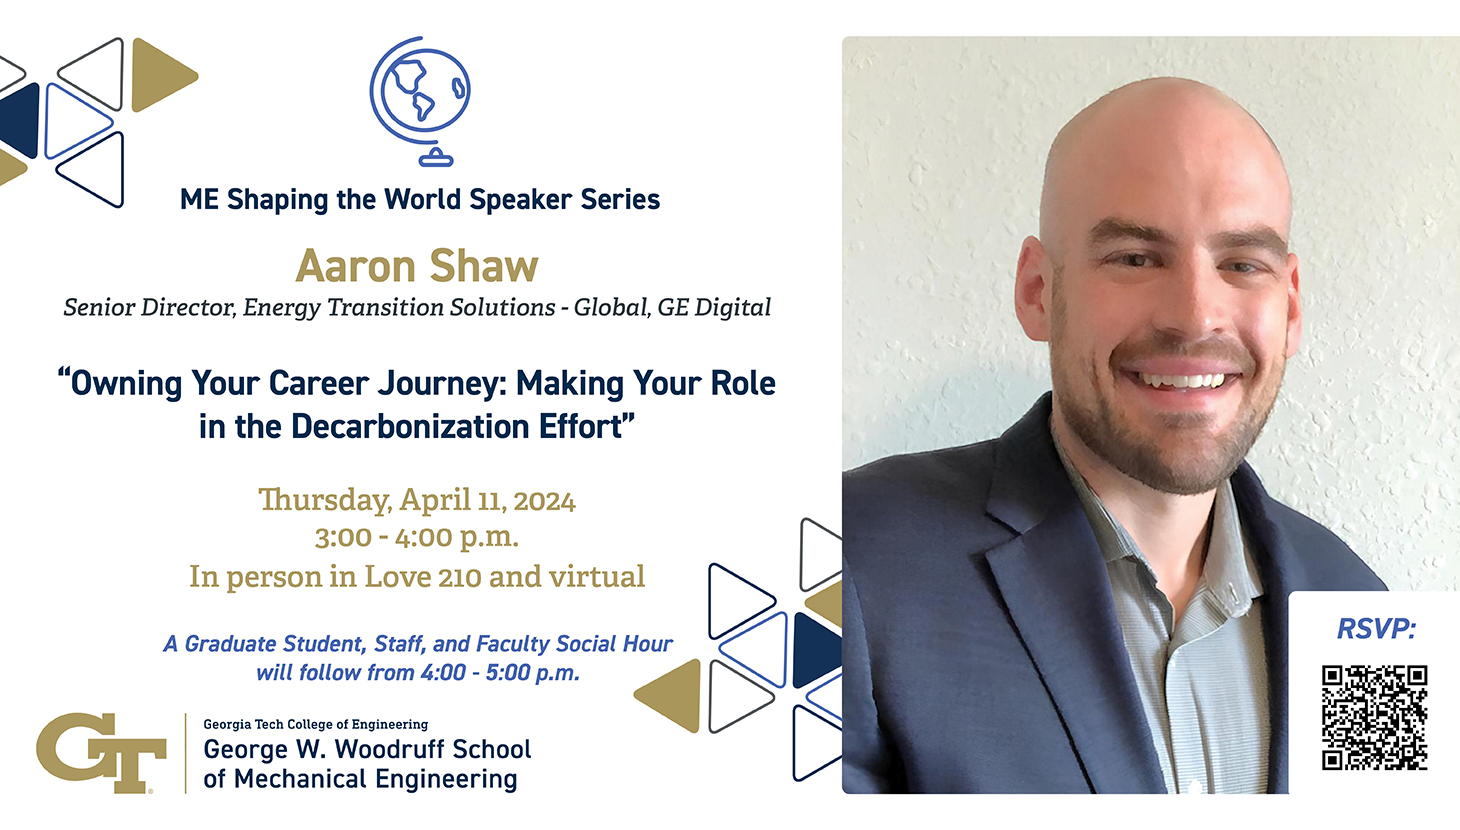 Aaron Shaw, ME Shaping the World Speaker Series